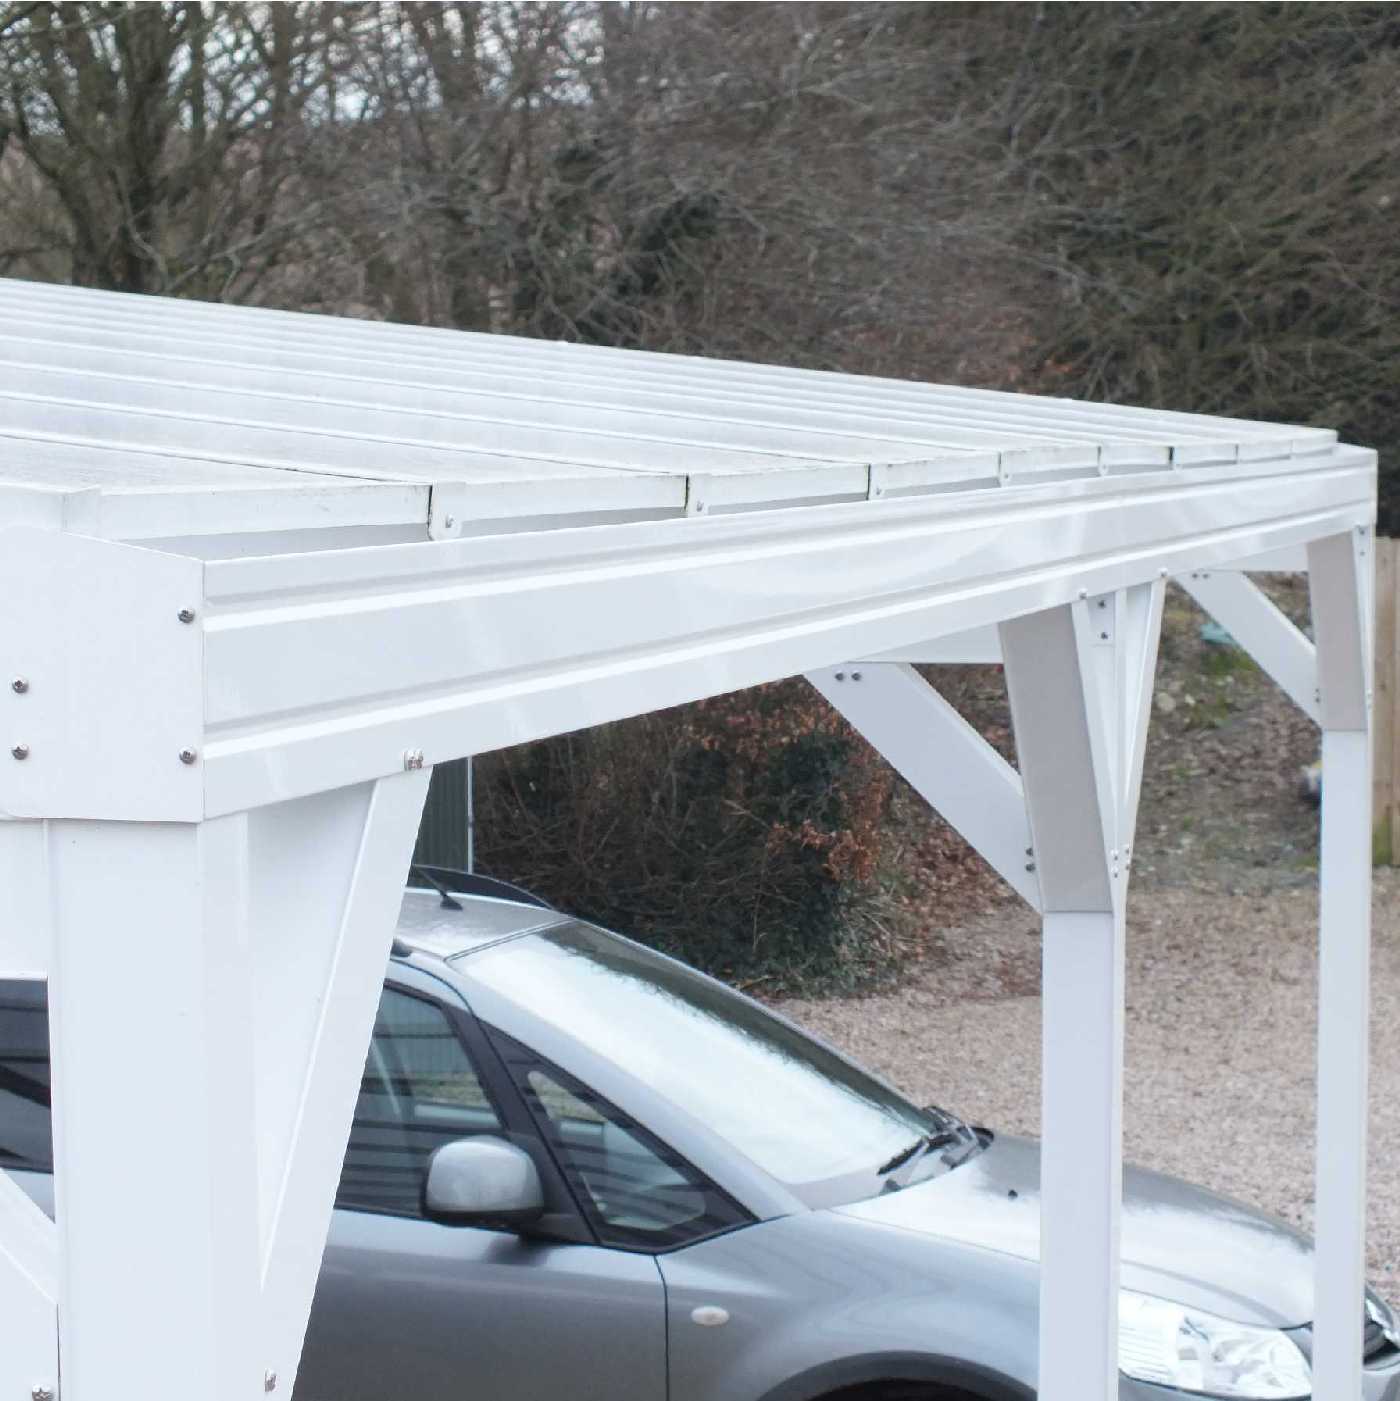 Omega Smart Free-Standing, White MonoPitch Roof Canopy with 16mm Polycarbonate Glazing - 4.9m (W) x 4.0m (P), (6) Supporting Posts from Omega Build